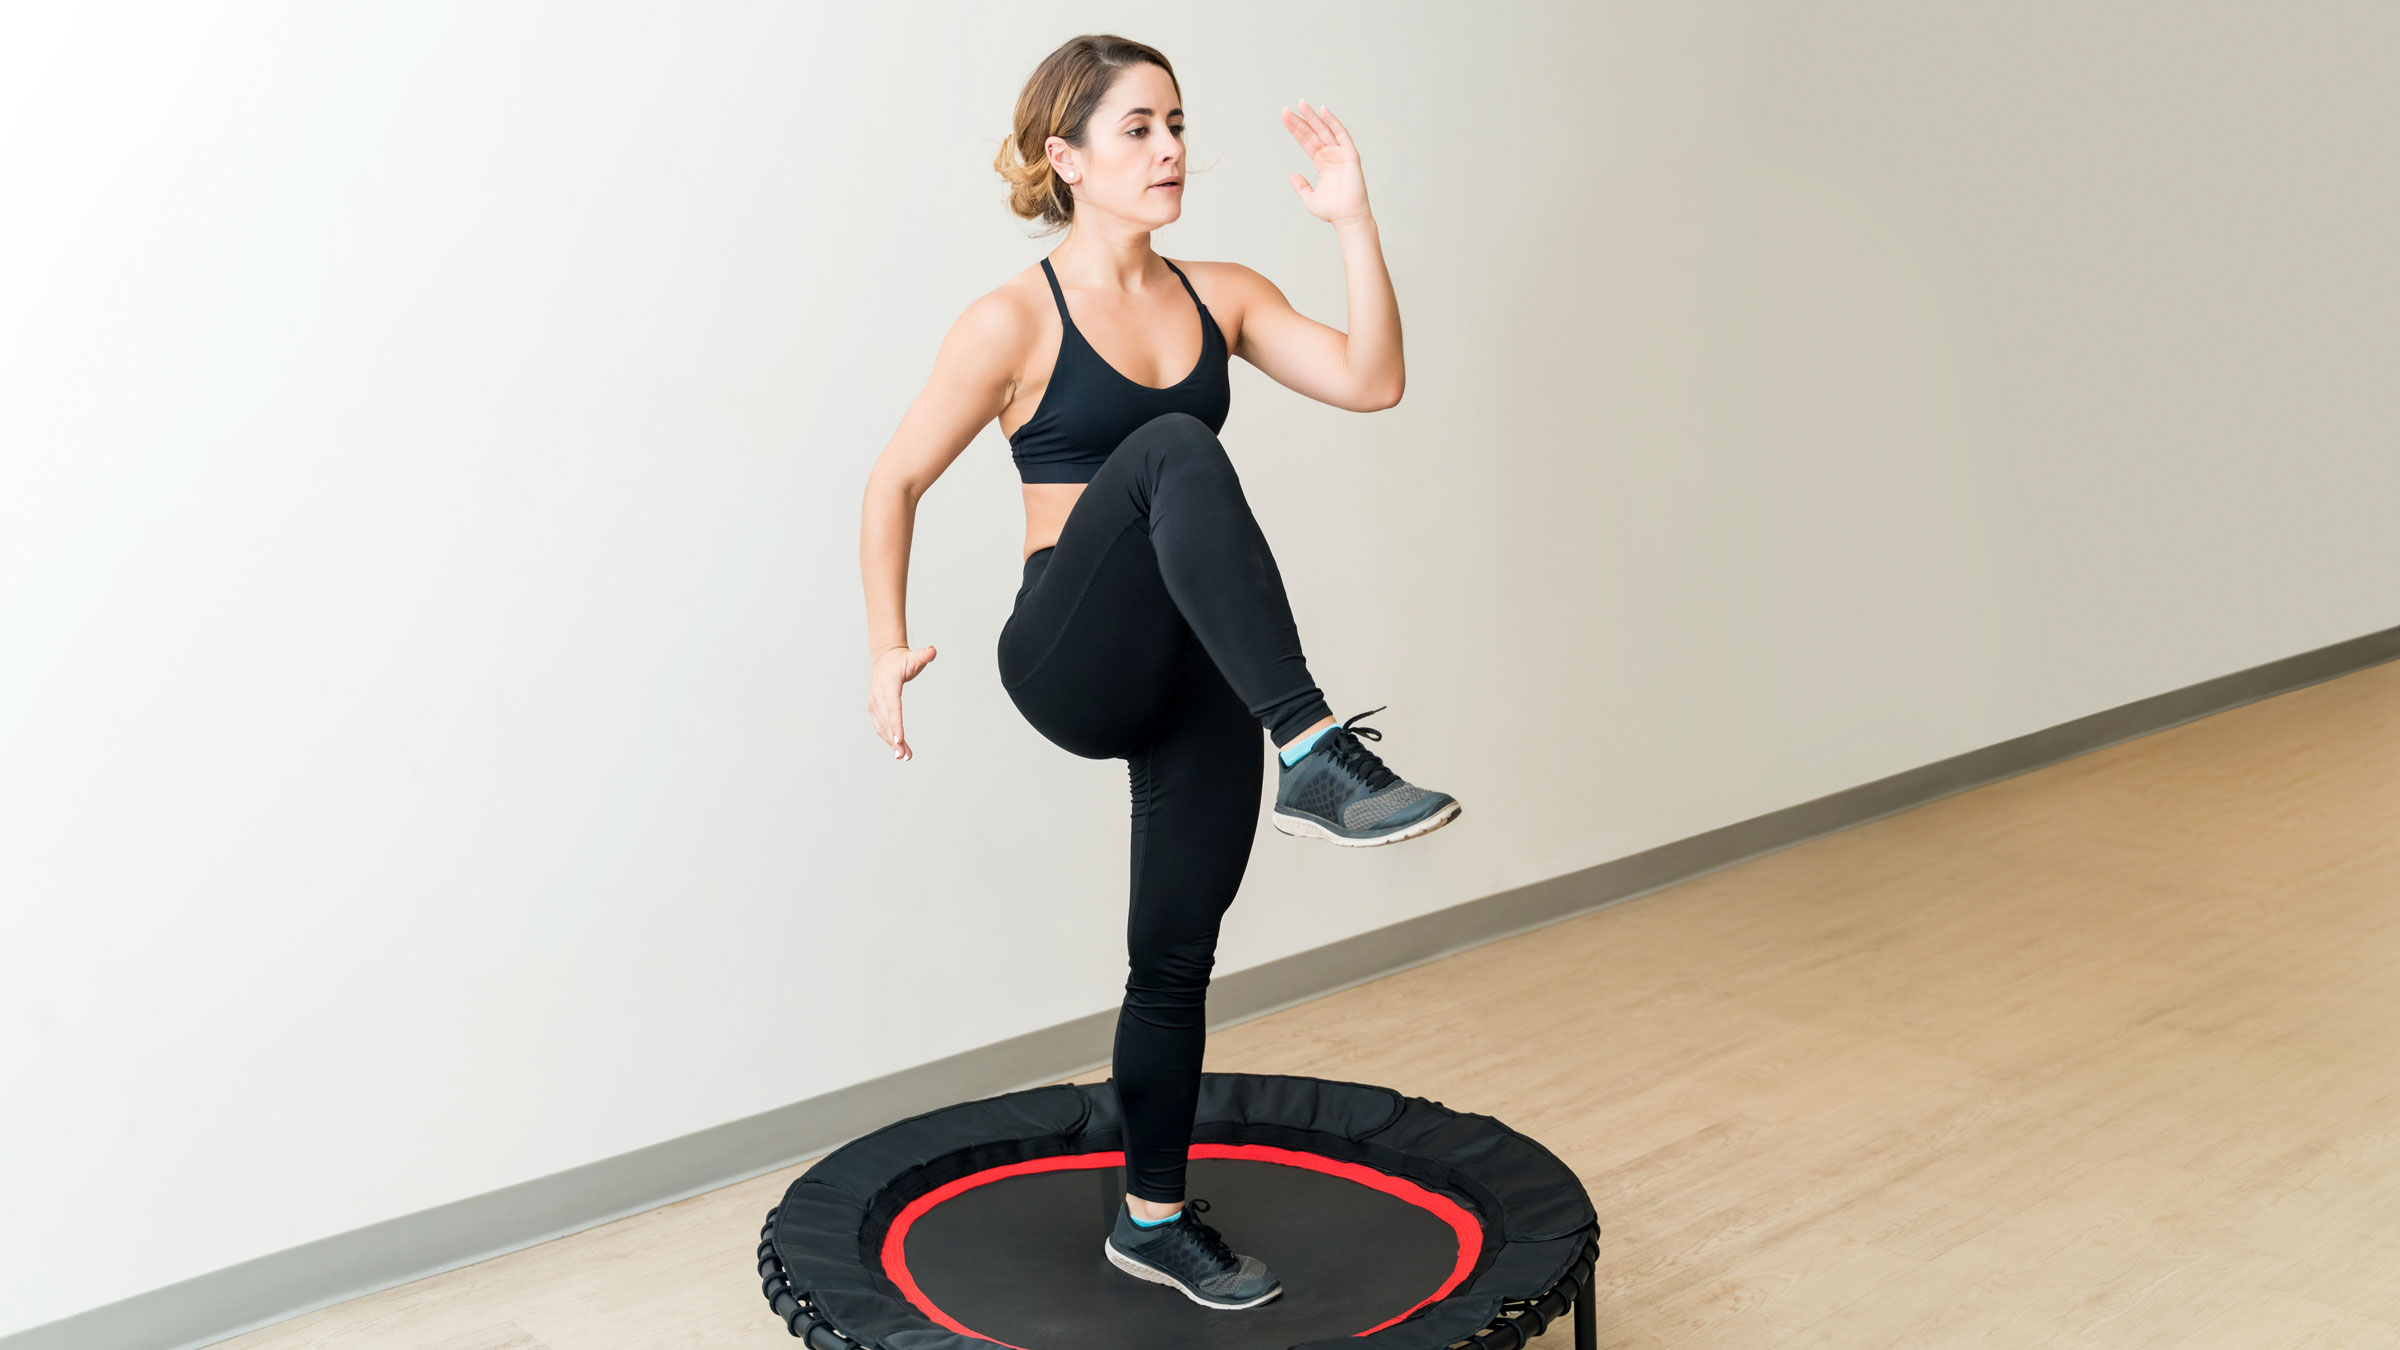 Sportsmand Thicken detaljer 9 Rebounding Exercises for the Best Home Workout - GoodRx